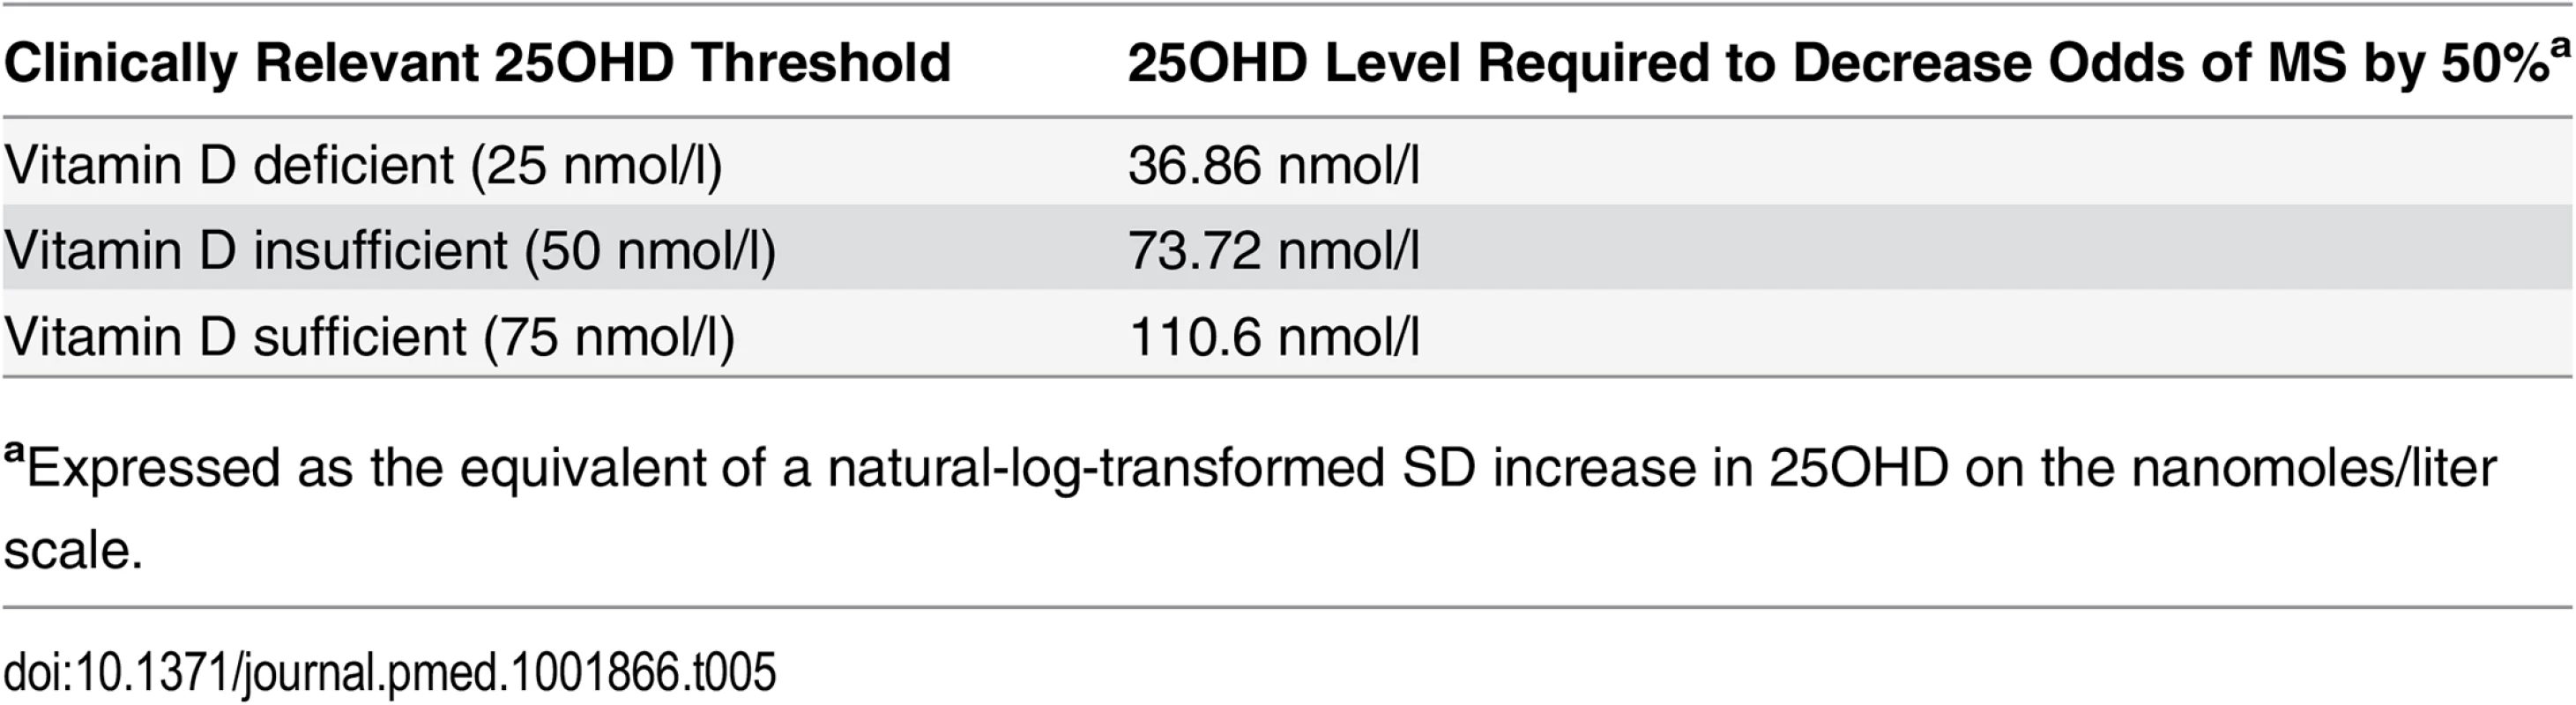 Clinical equivalence of a 1-SD natural-log increase in 25OHD for various vitamin D thresholds.